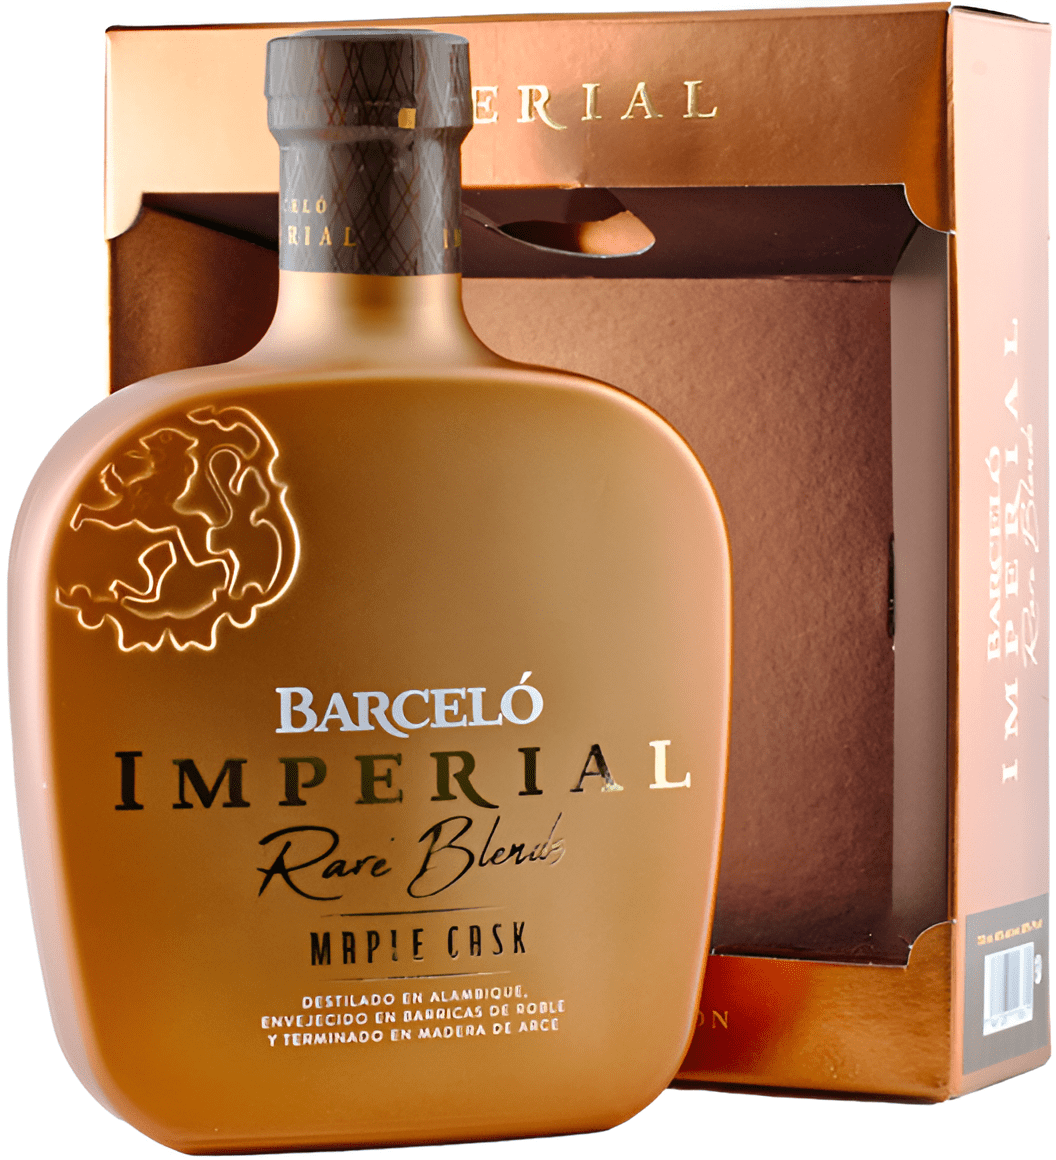 Ron Barceló Imperial Rum - Spirits from The Whisky World UK